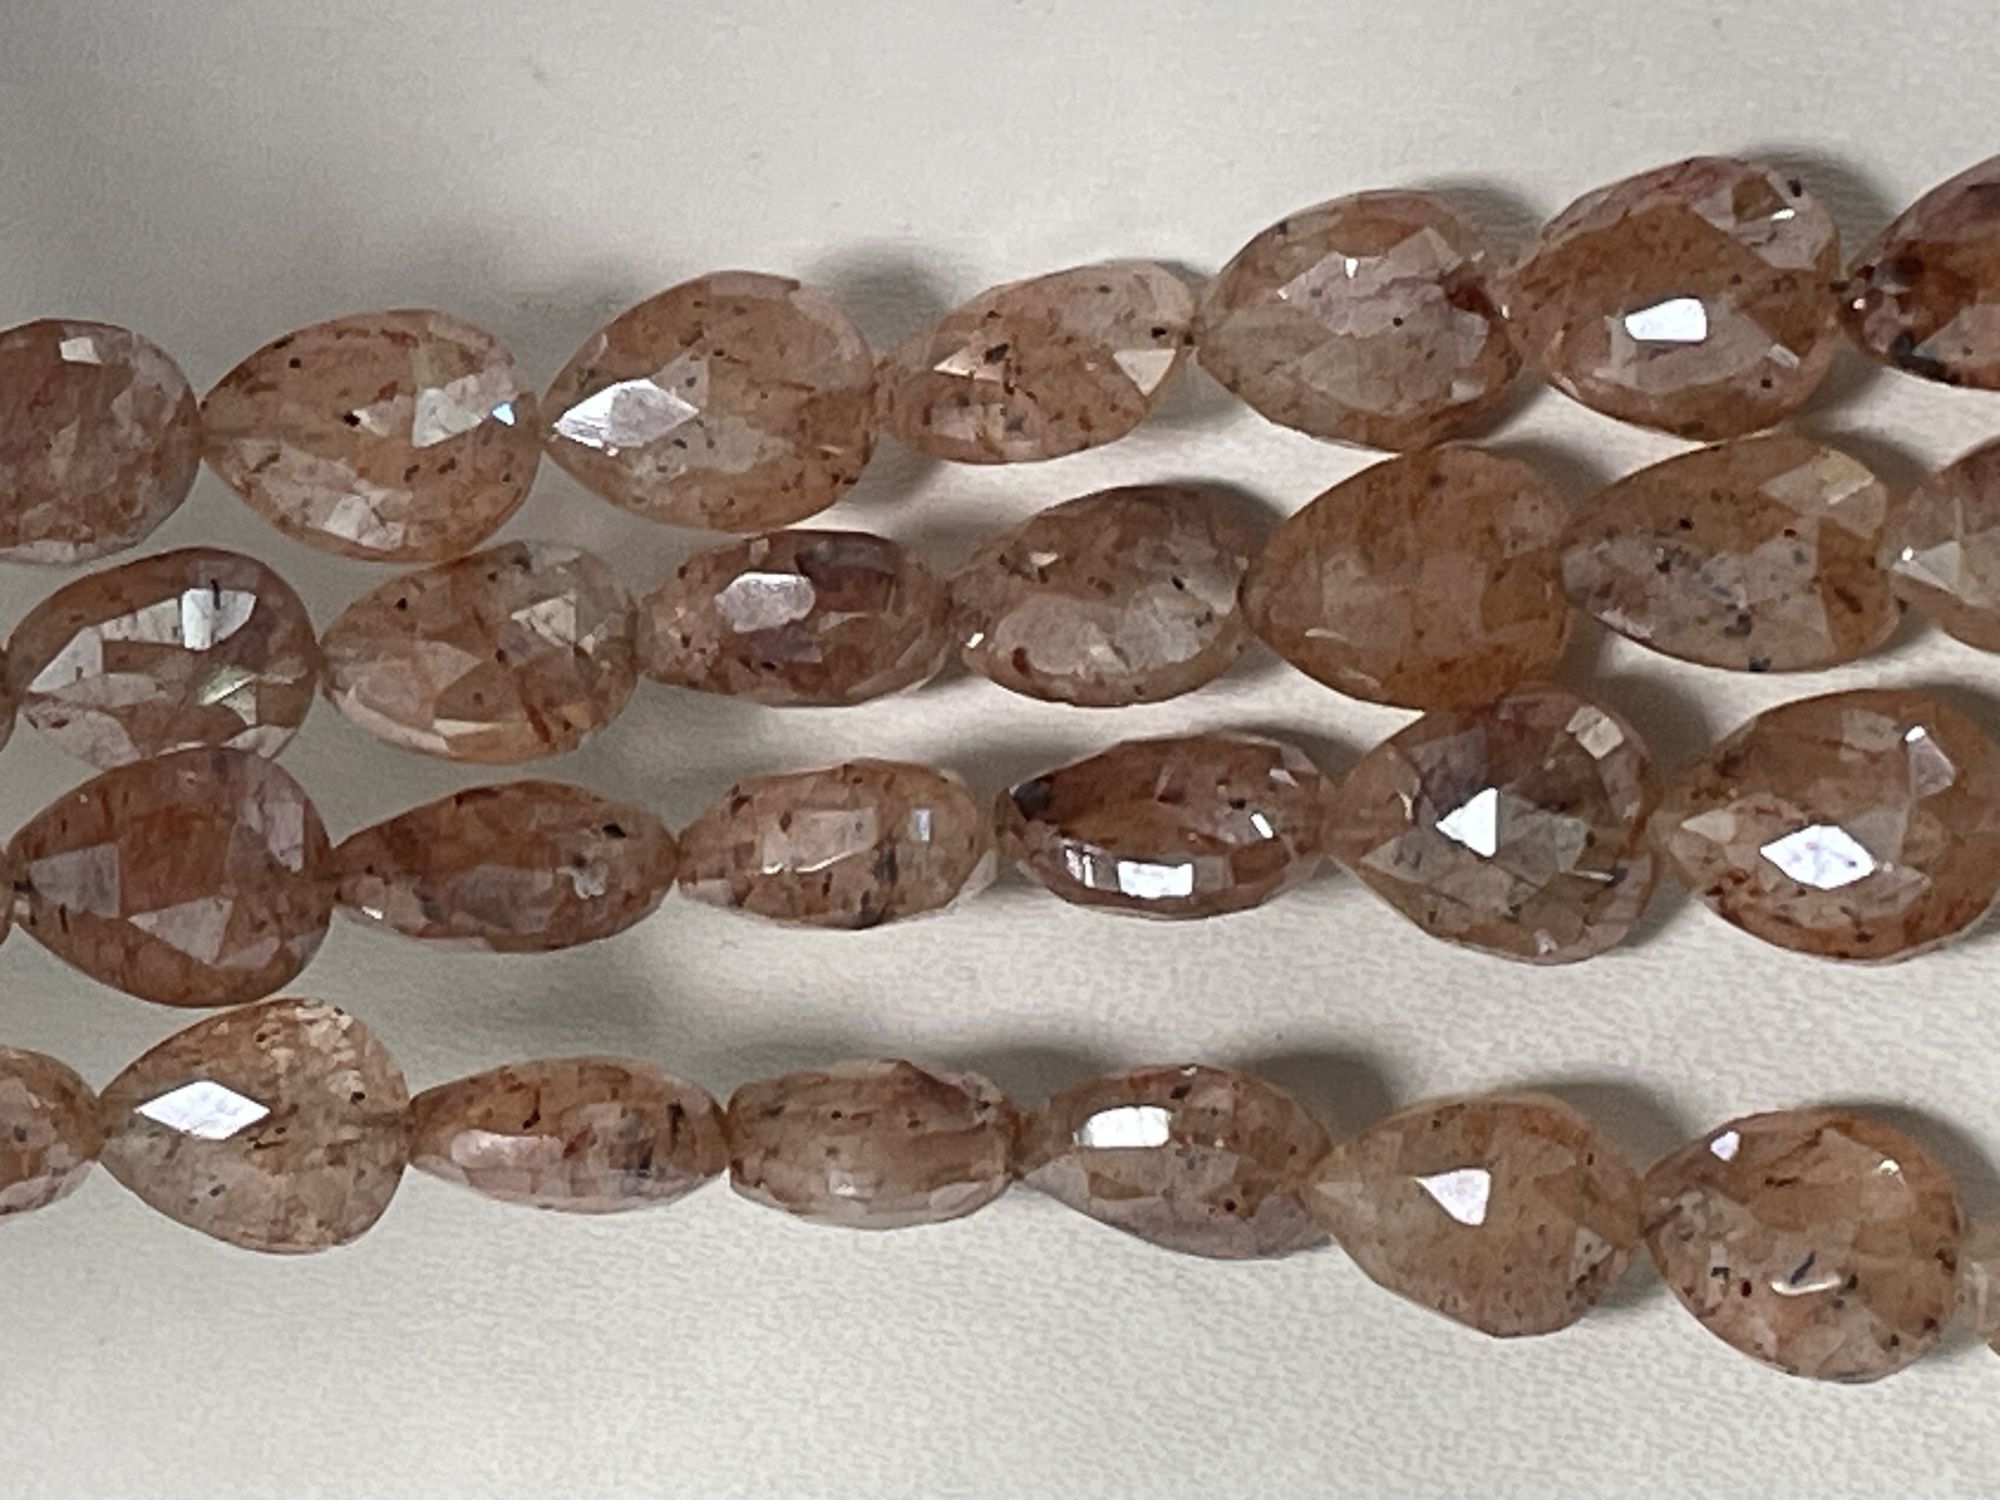 Coated Brown Silverite Pear Faceted